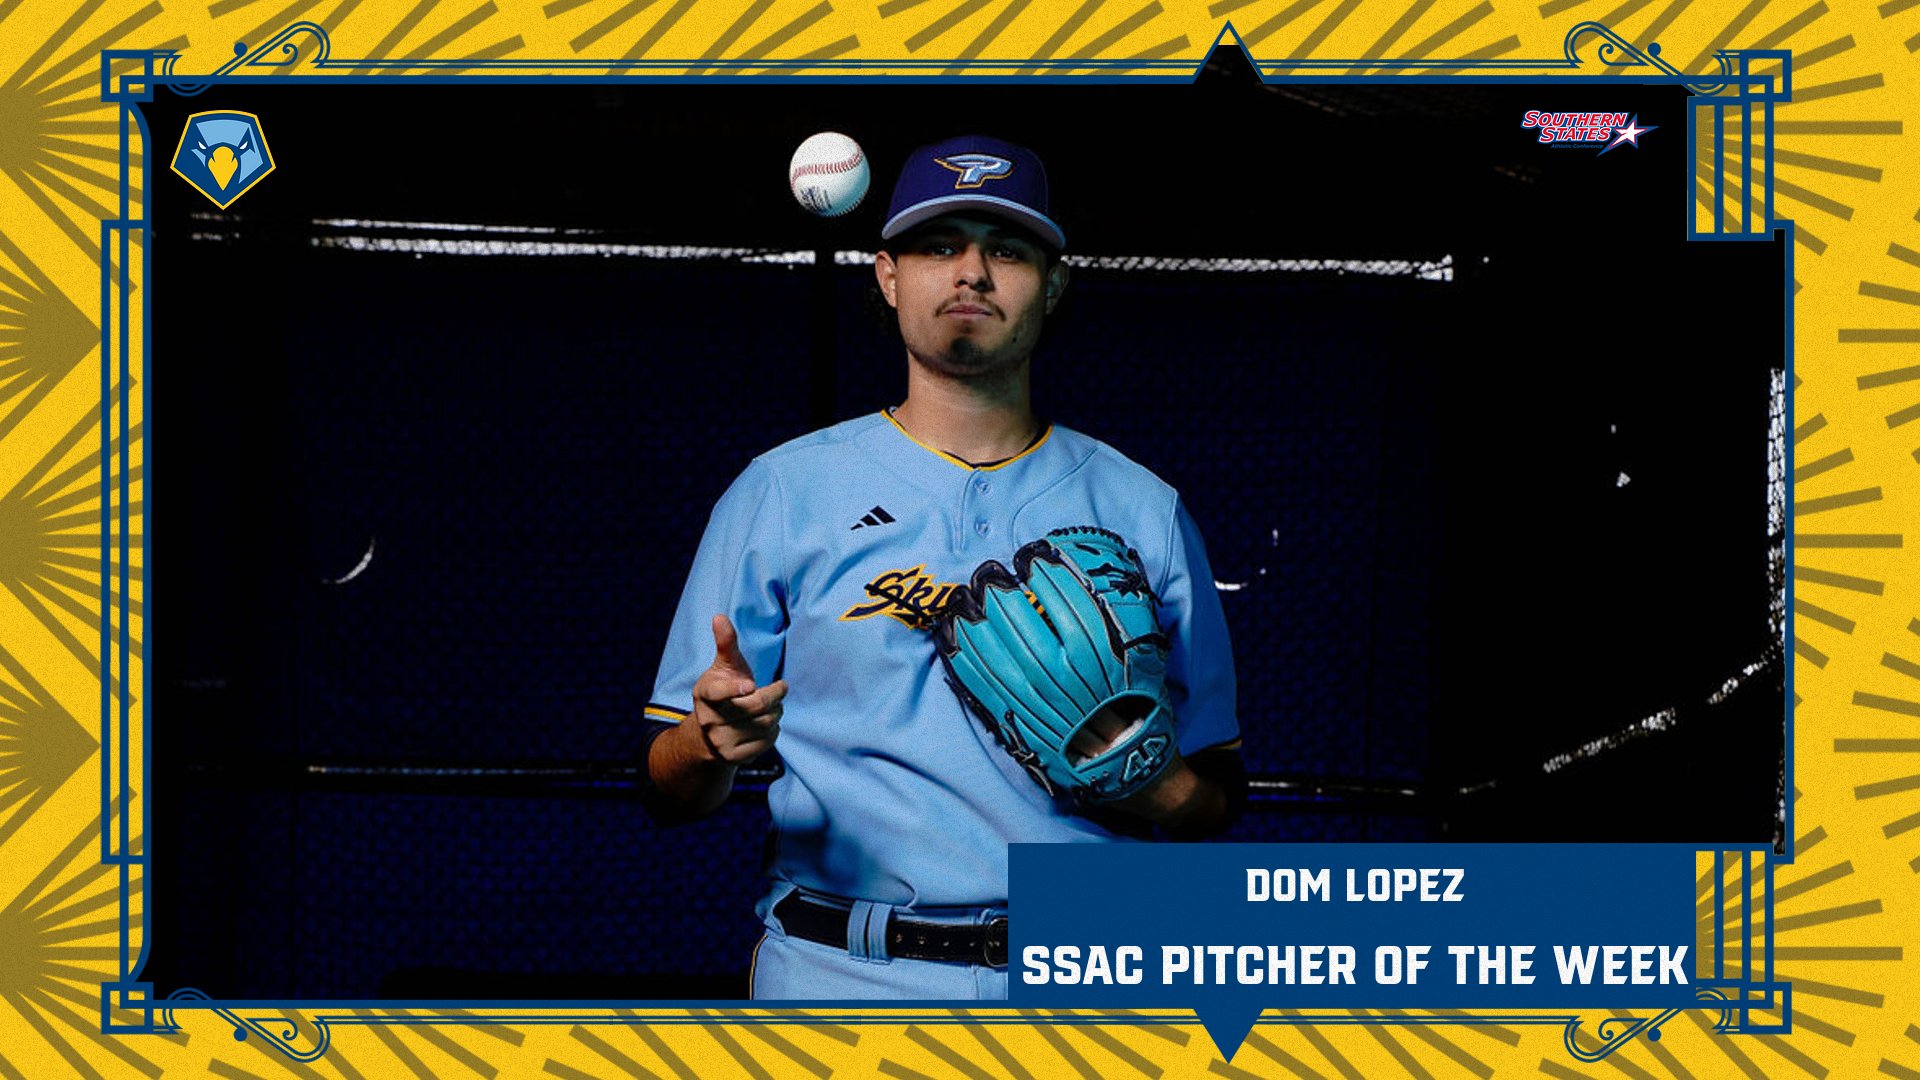 Julio Lopez earns SSAC Pitcher of the Week honors